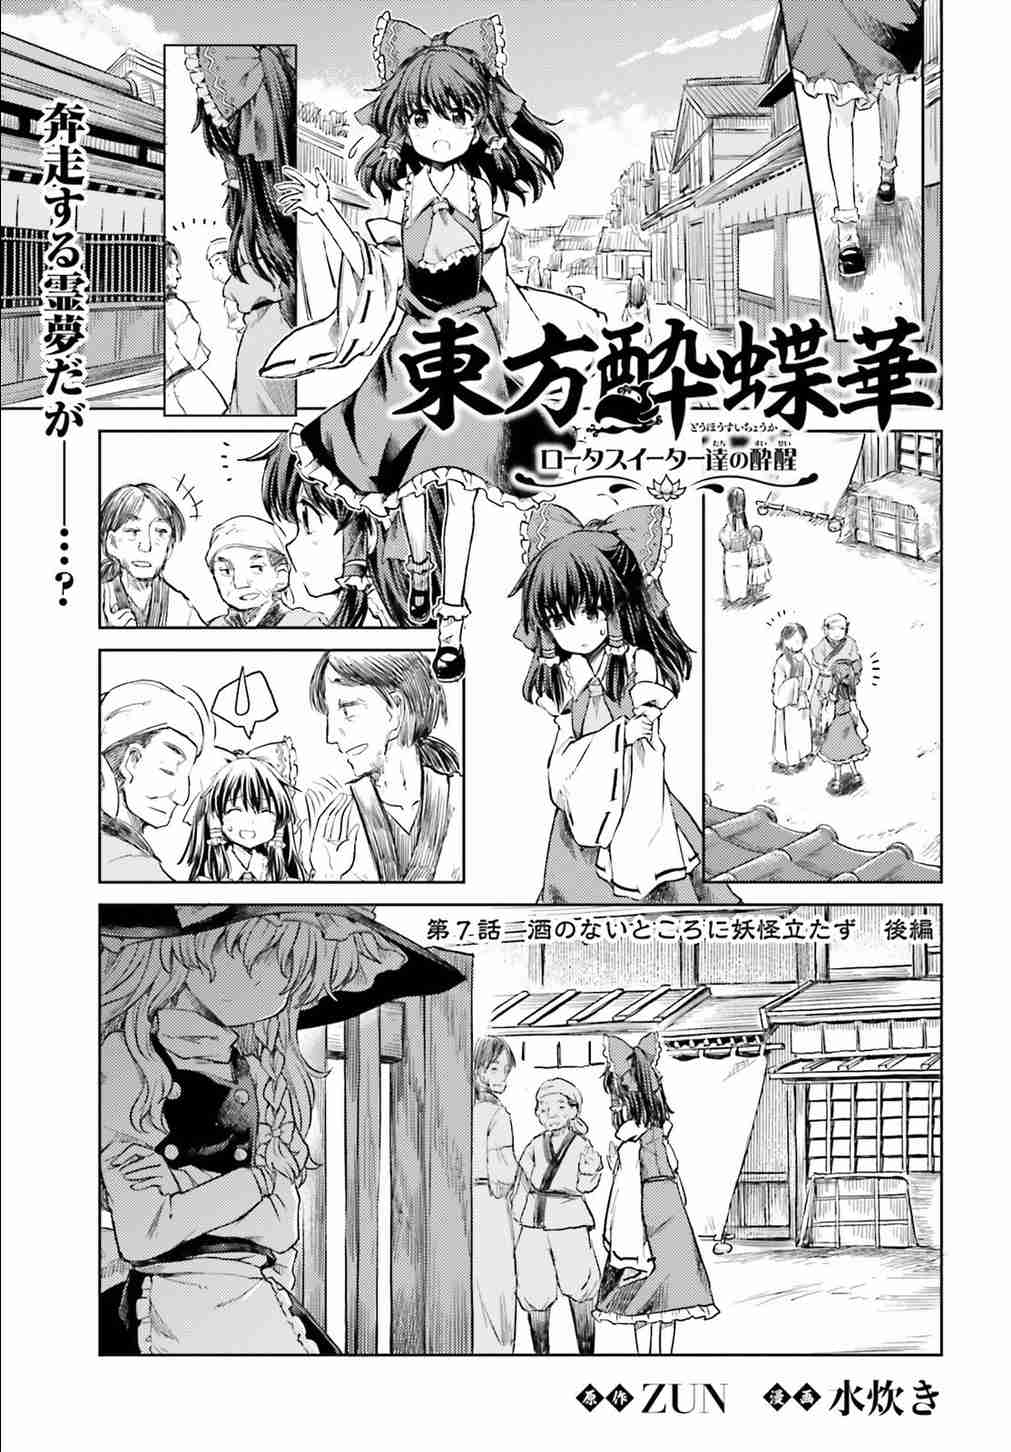 Touhou Suichouka ~ Lotus Eater tachi no Suisei Vol. 1 Ch. 7 No Youkai Stands in a Place Without Sake (Part 2)